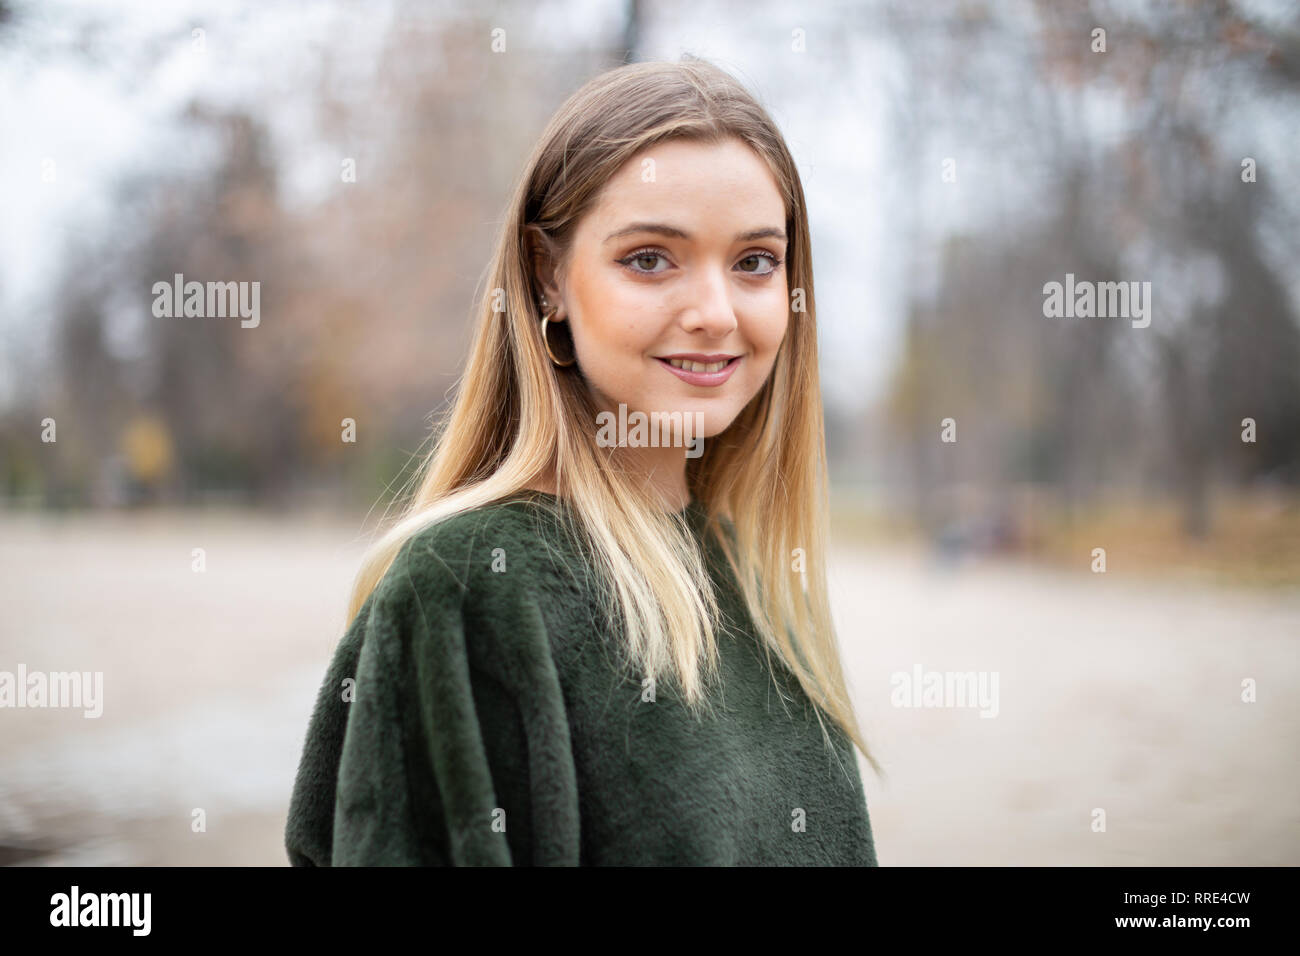 Portrait of happy smiling young blond woman in a park in autumn Stock Photo